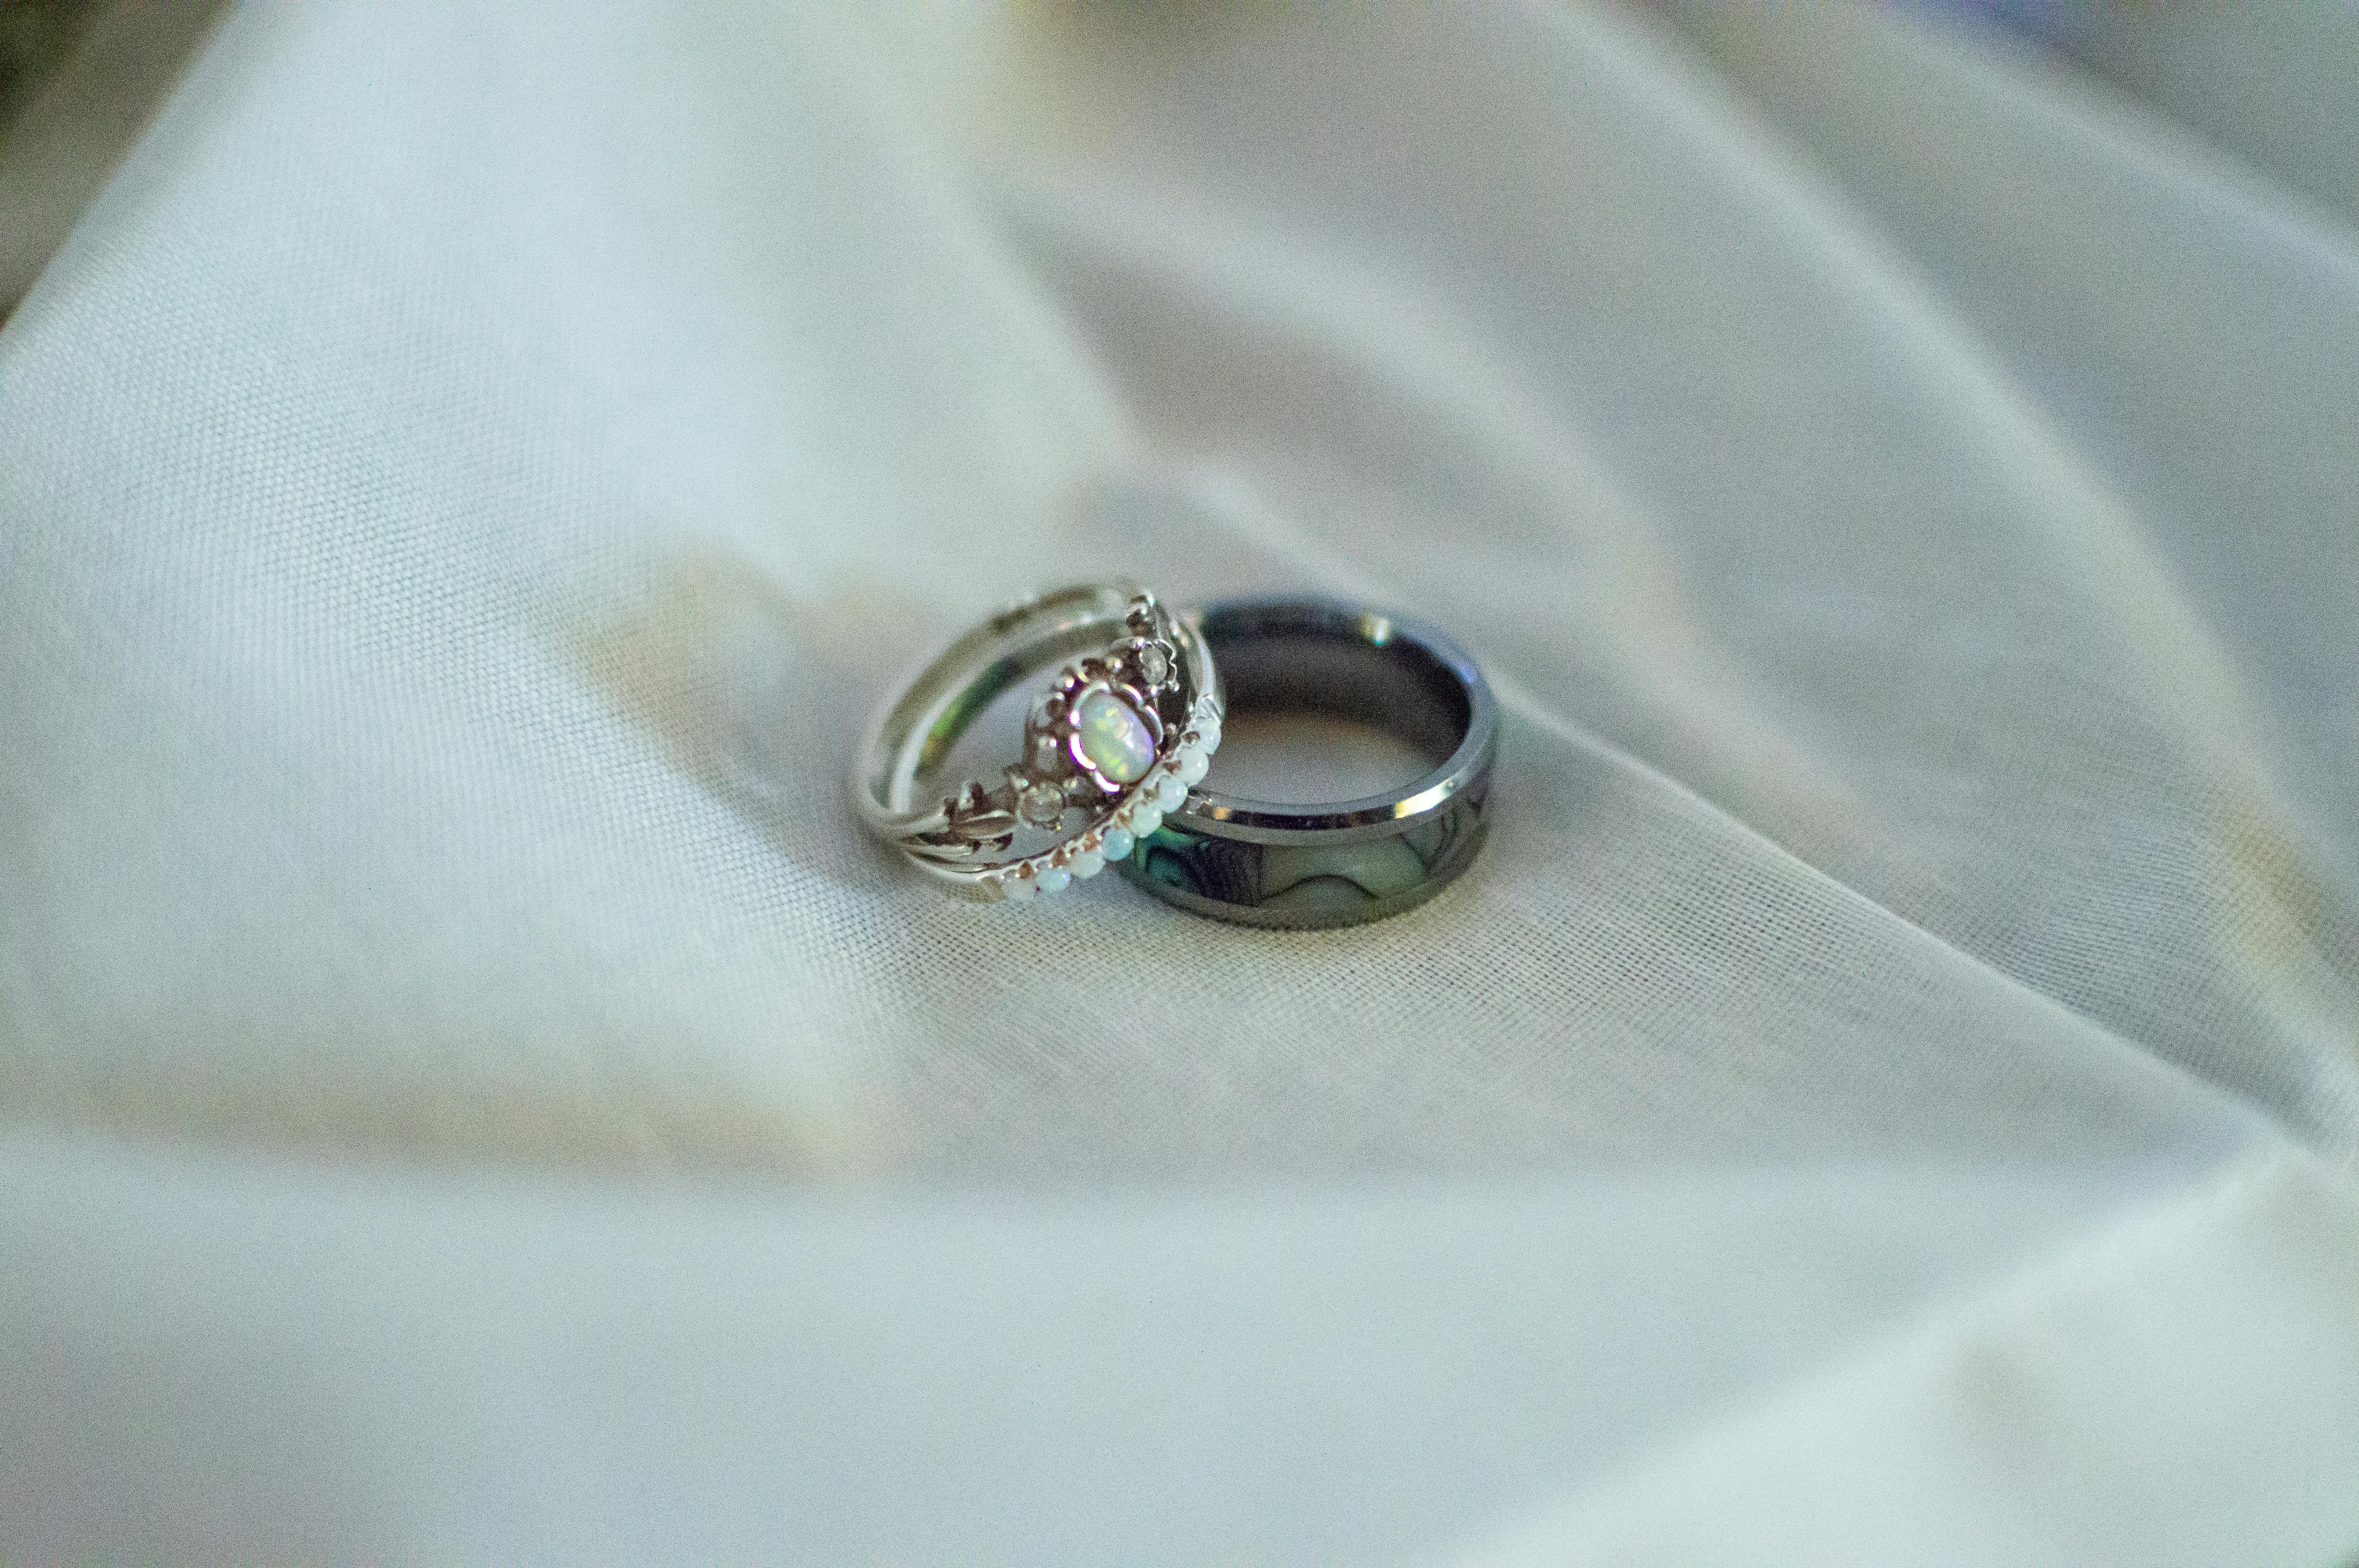 Free stock photo of engagement ring, pearl ring, rings